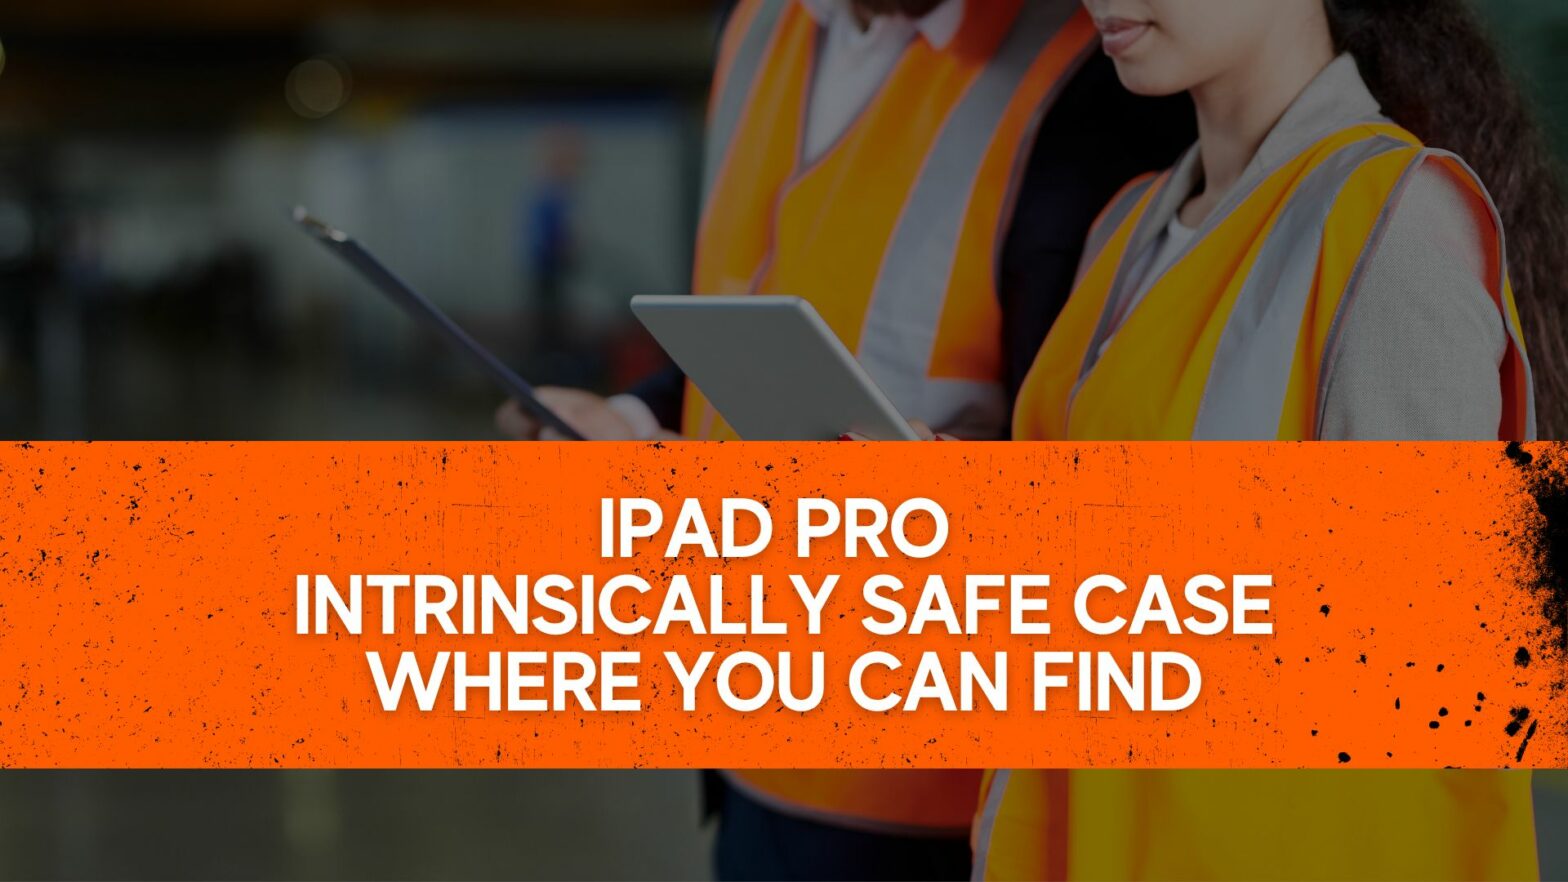 iPad Pro Intrinsically Safe Case - Where you can find